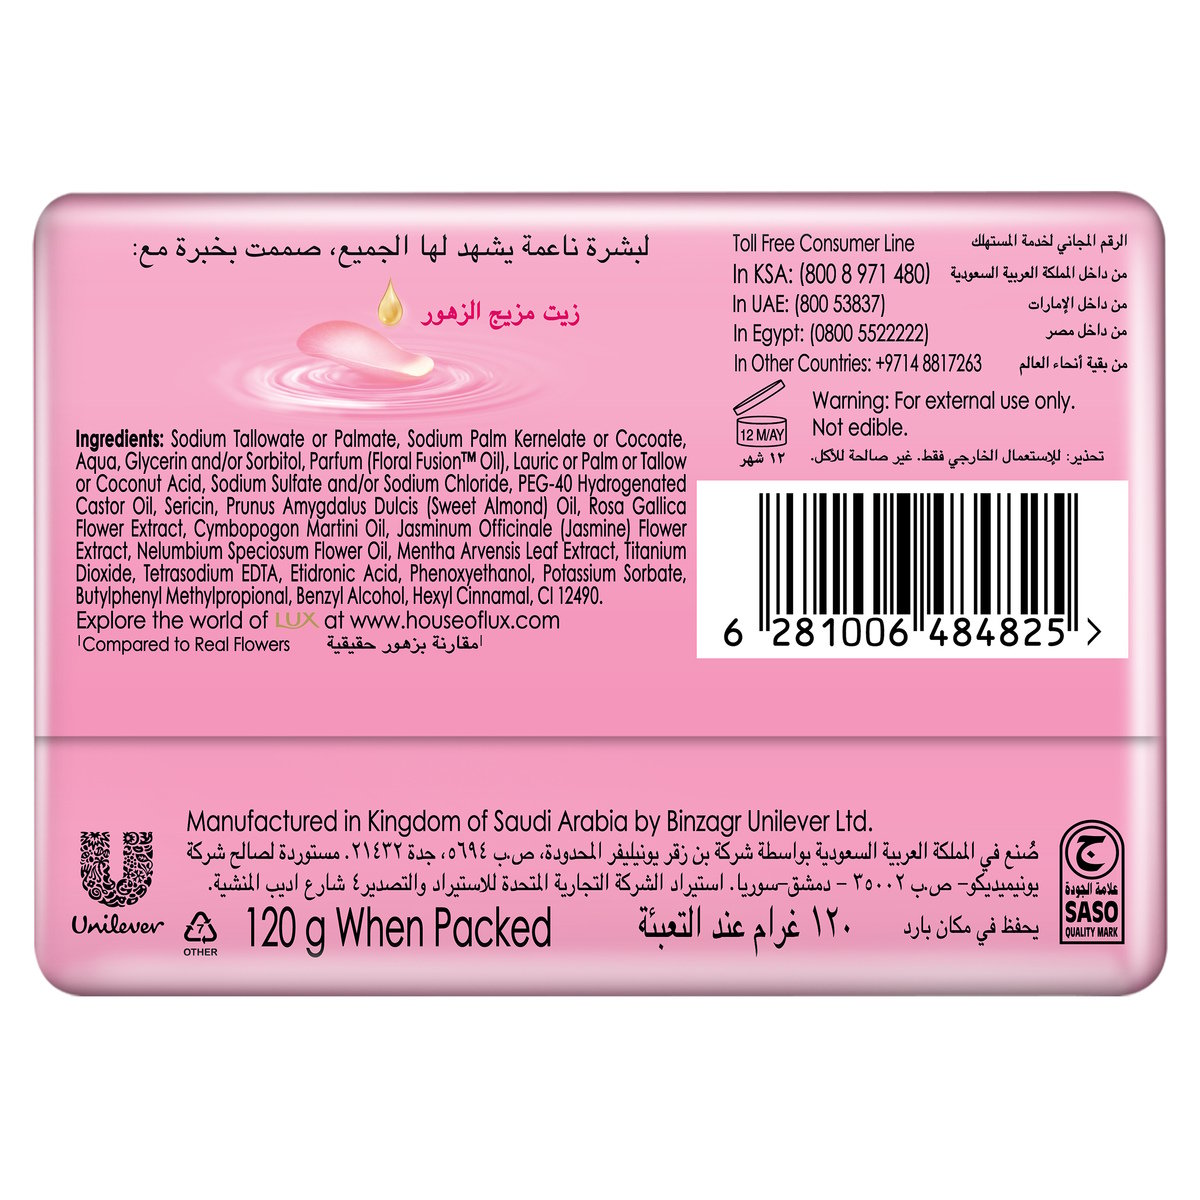 Lux Bar Soap Soft Touch 120 g